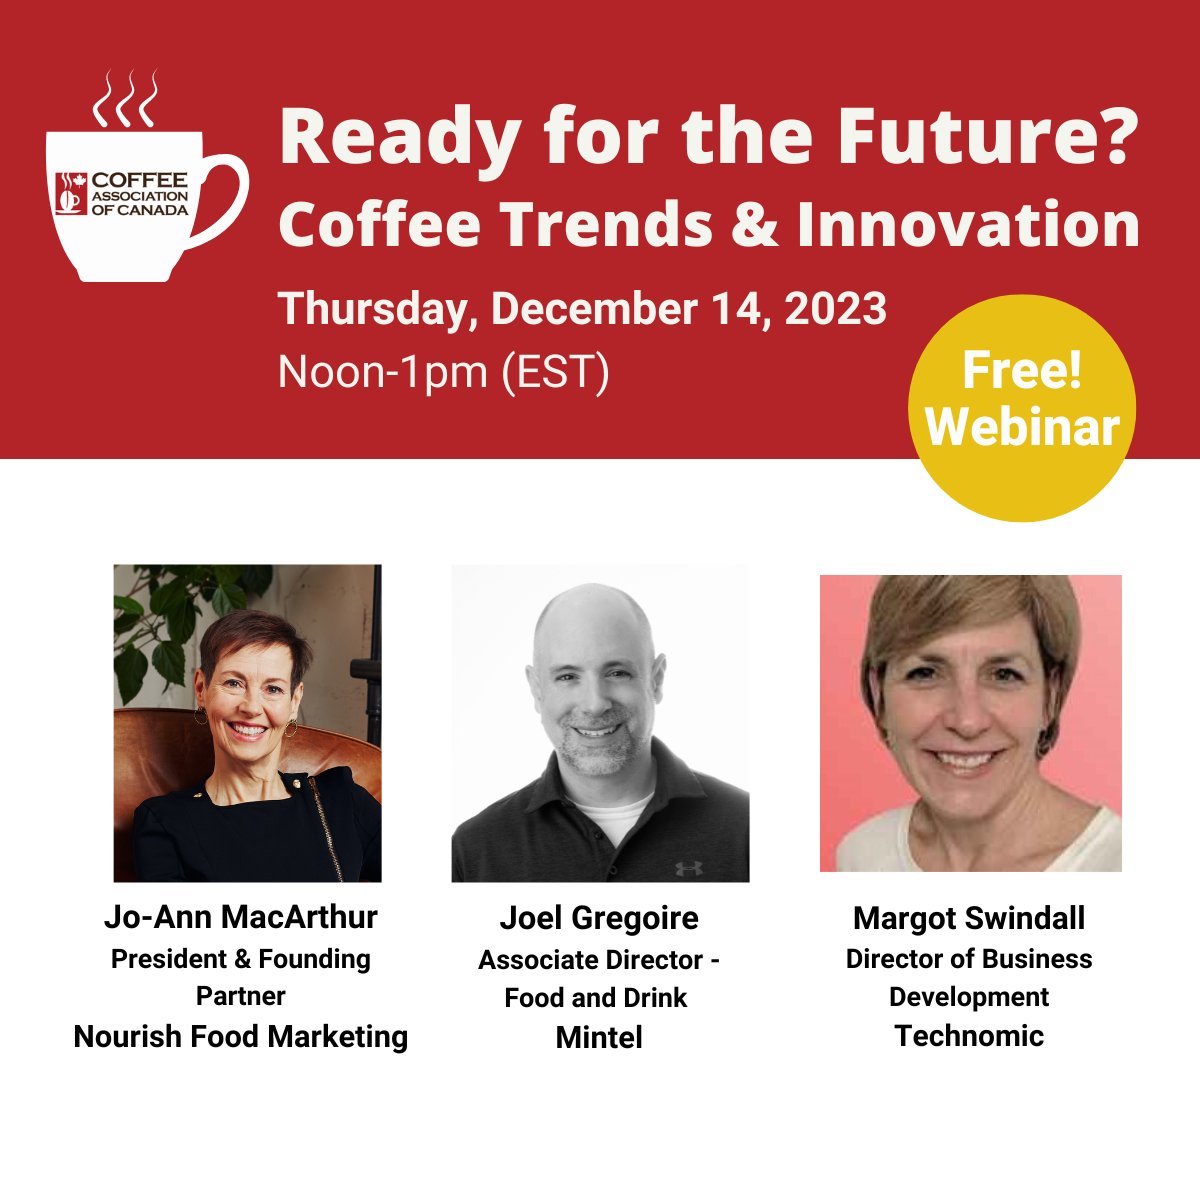 Our final webinar for 2023 is filling up! We're pleased that @JoAnnMcArthur @nourishfoodmark  will join Margot Swindall  @technomic , Inc. and Joel Gregoire  @mintelnews  to discuss #future #trends and #innovations in the #coffee industry.

Register here: coffeeassoc.com/webinars/ready…